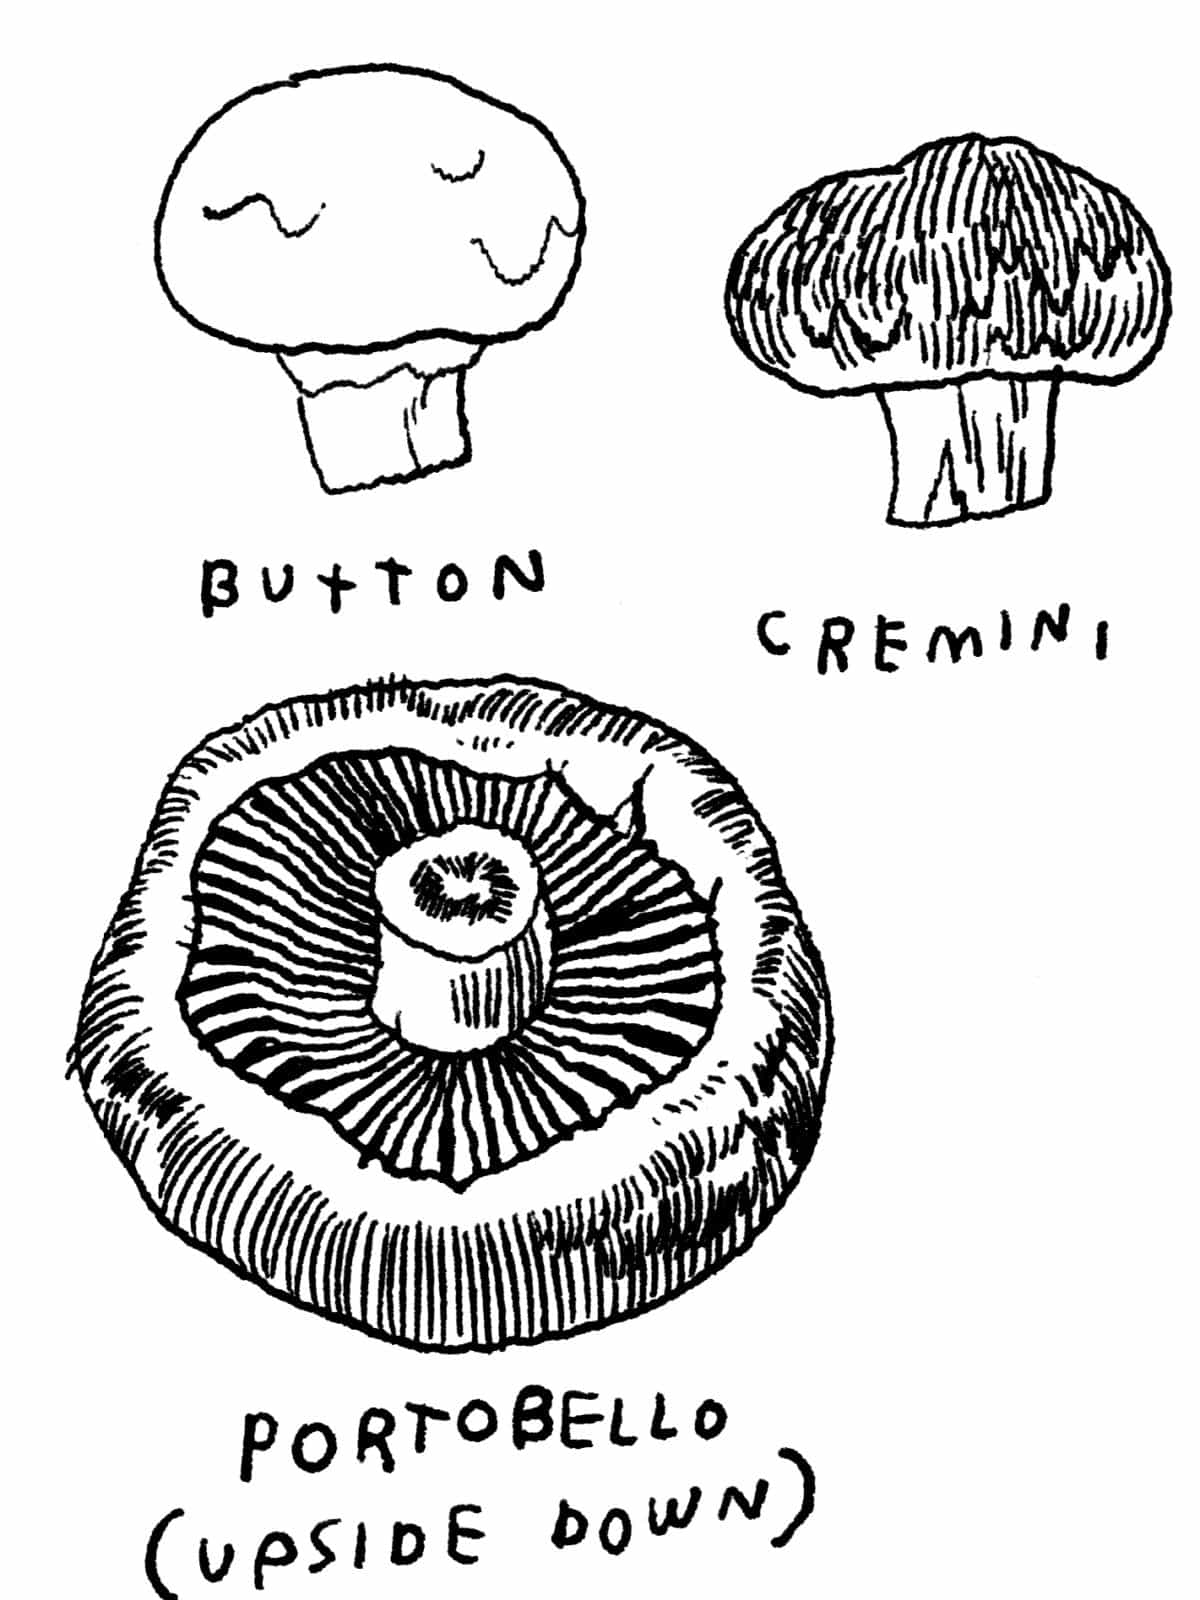 What's the Difference Between Cremini, Button, and Portobello Mushrooms?